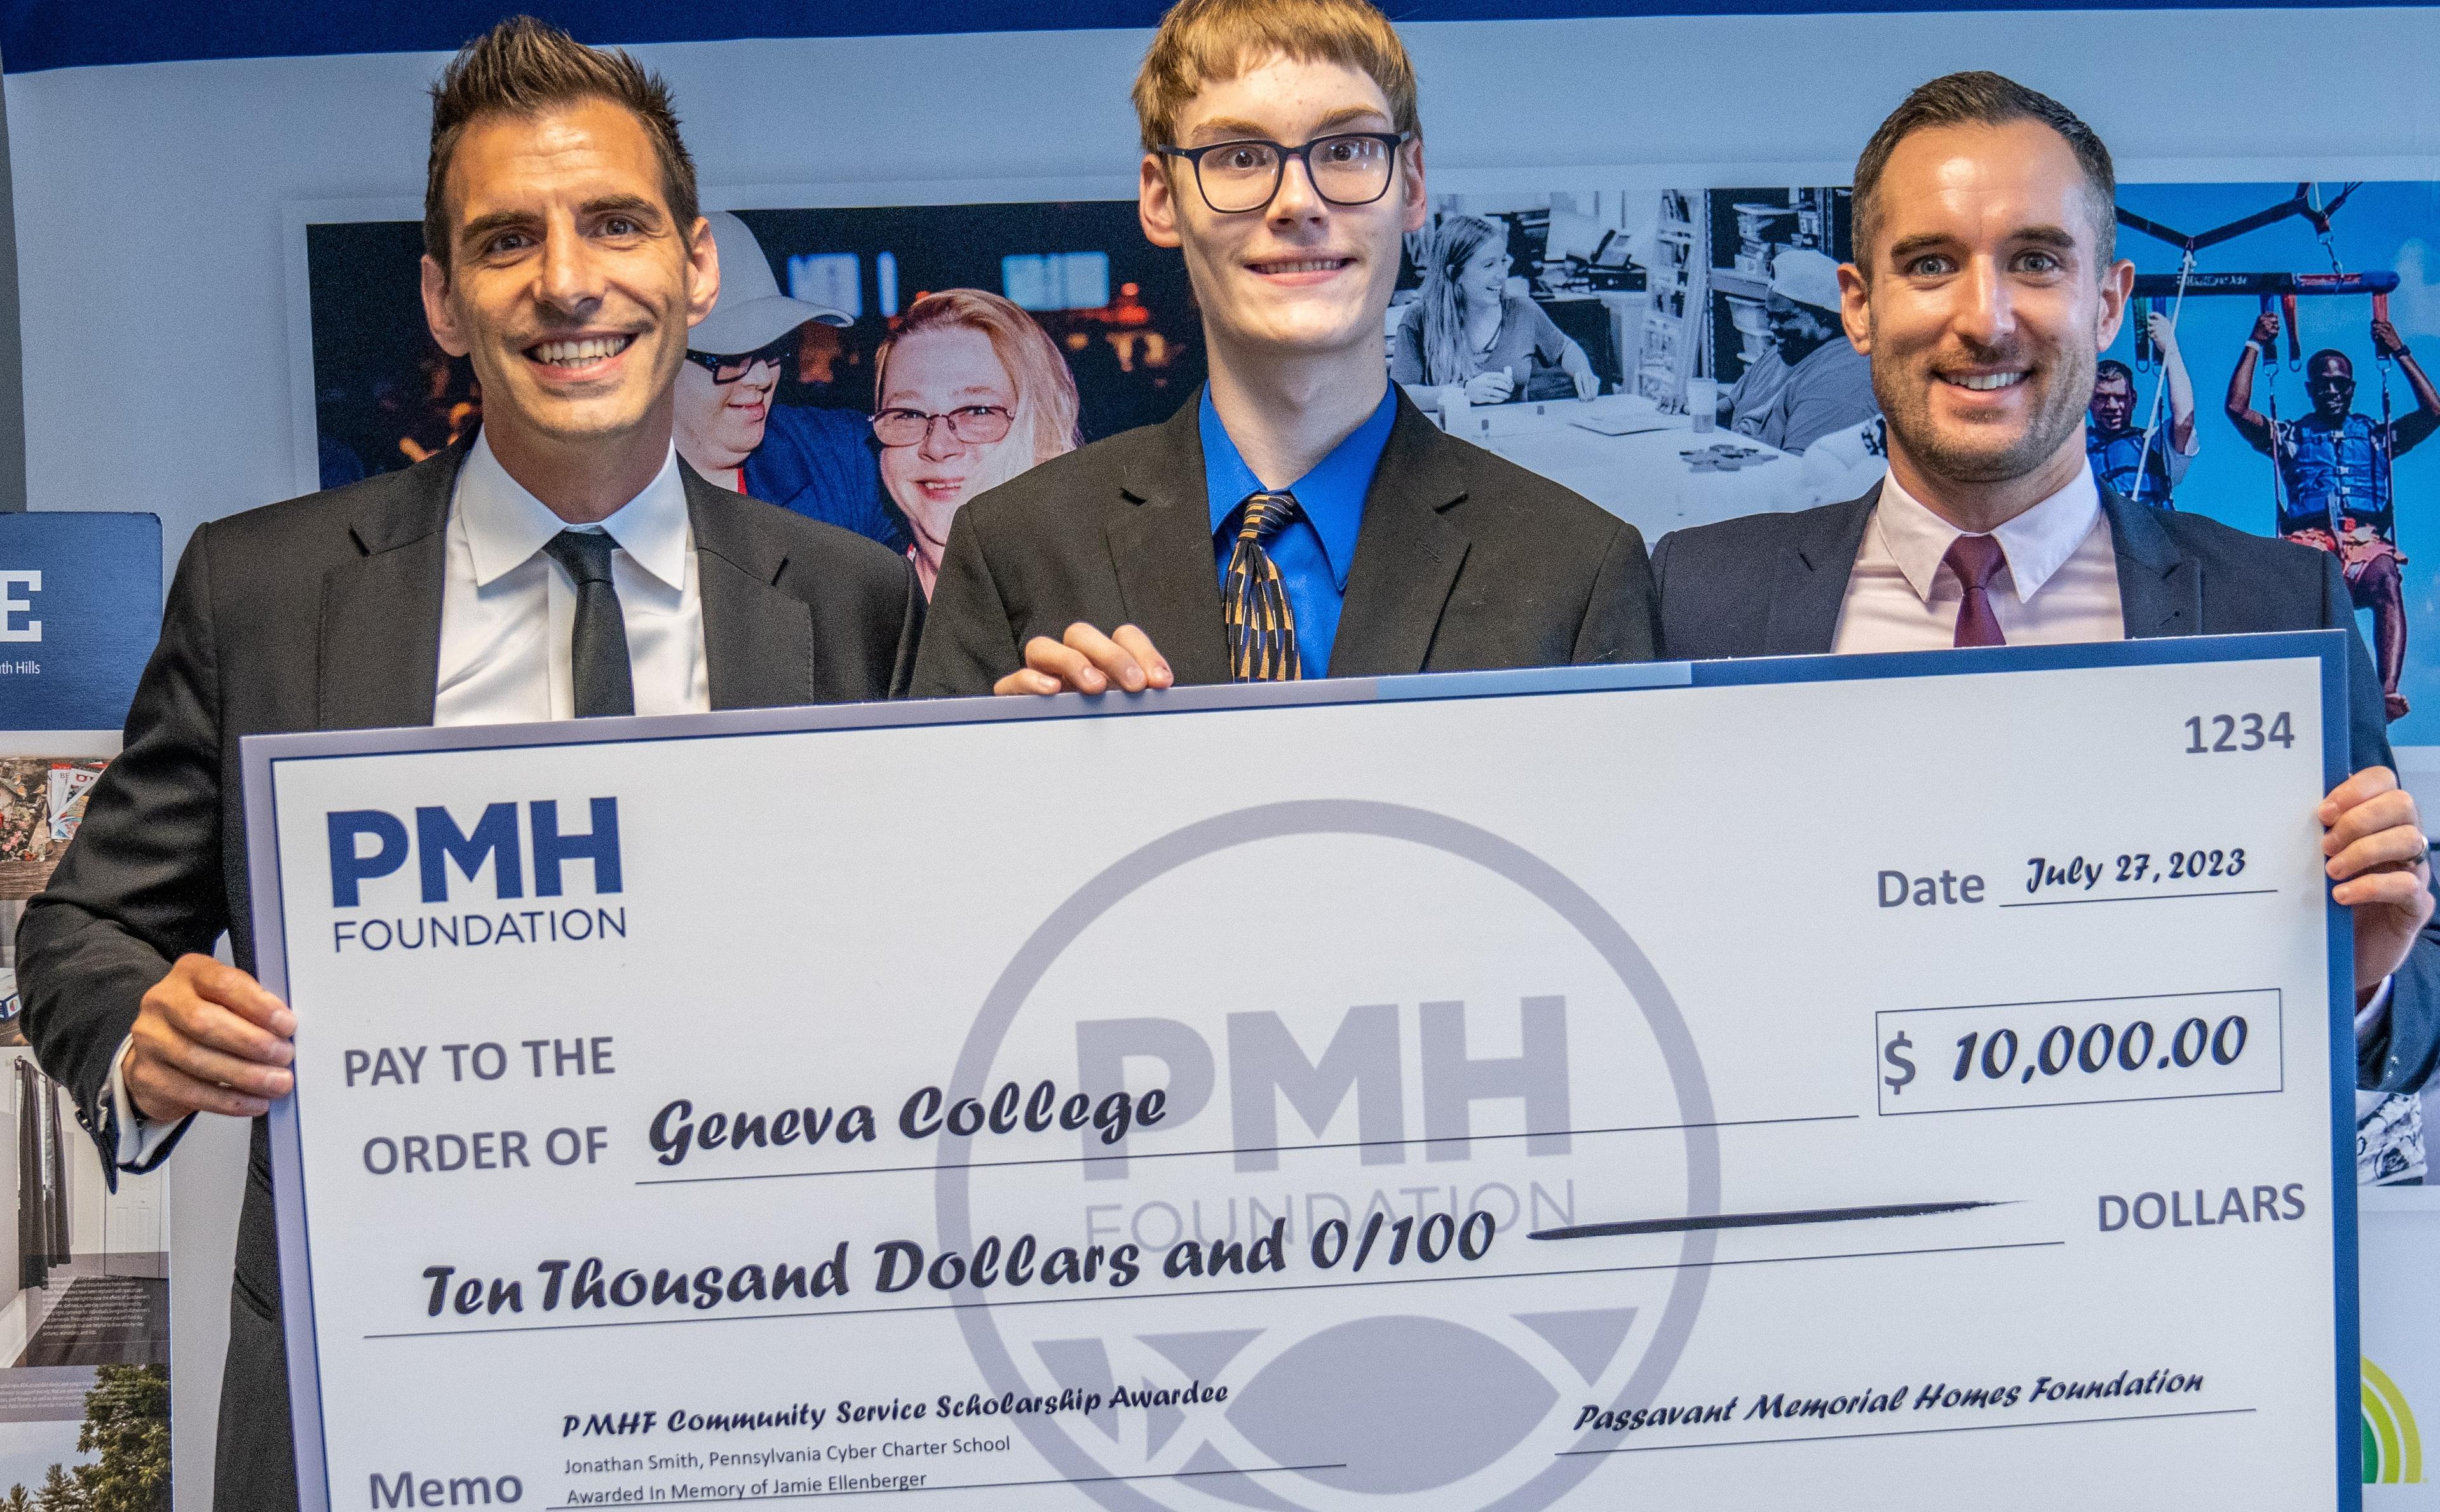 Student and two men stand behind a large check made out to Geneva College for $10,000.